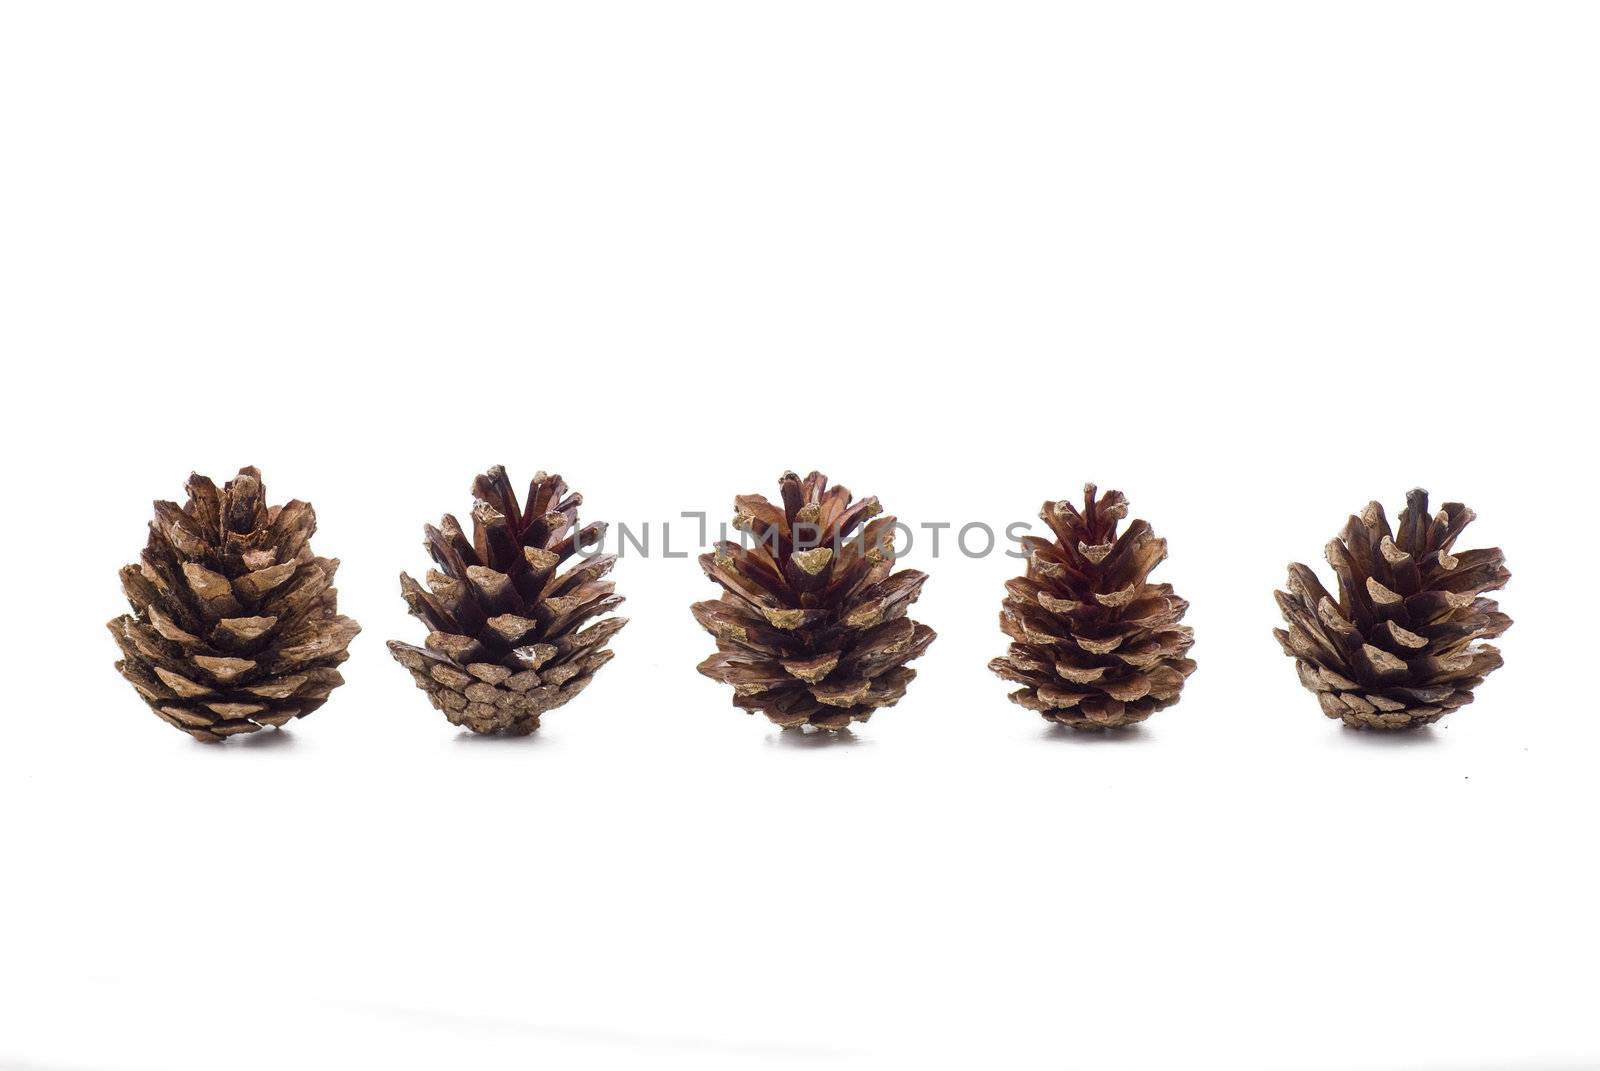 Several pine cones on the white background - isolated 